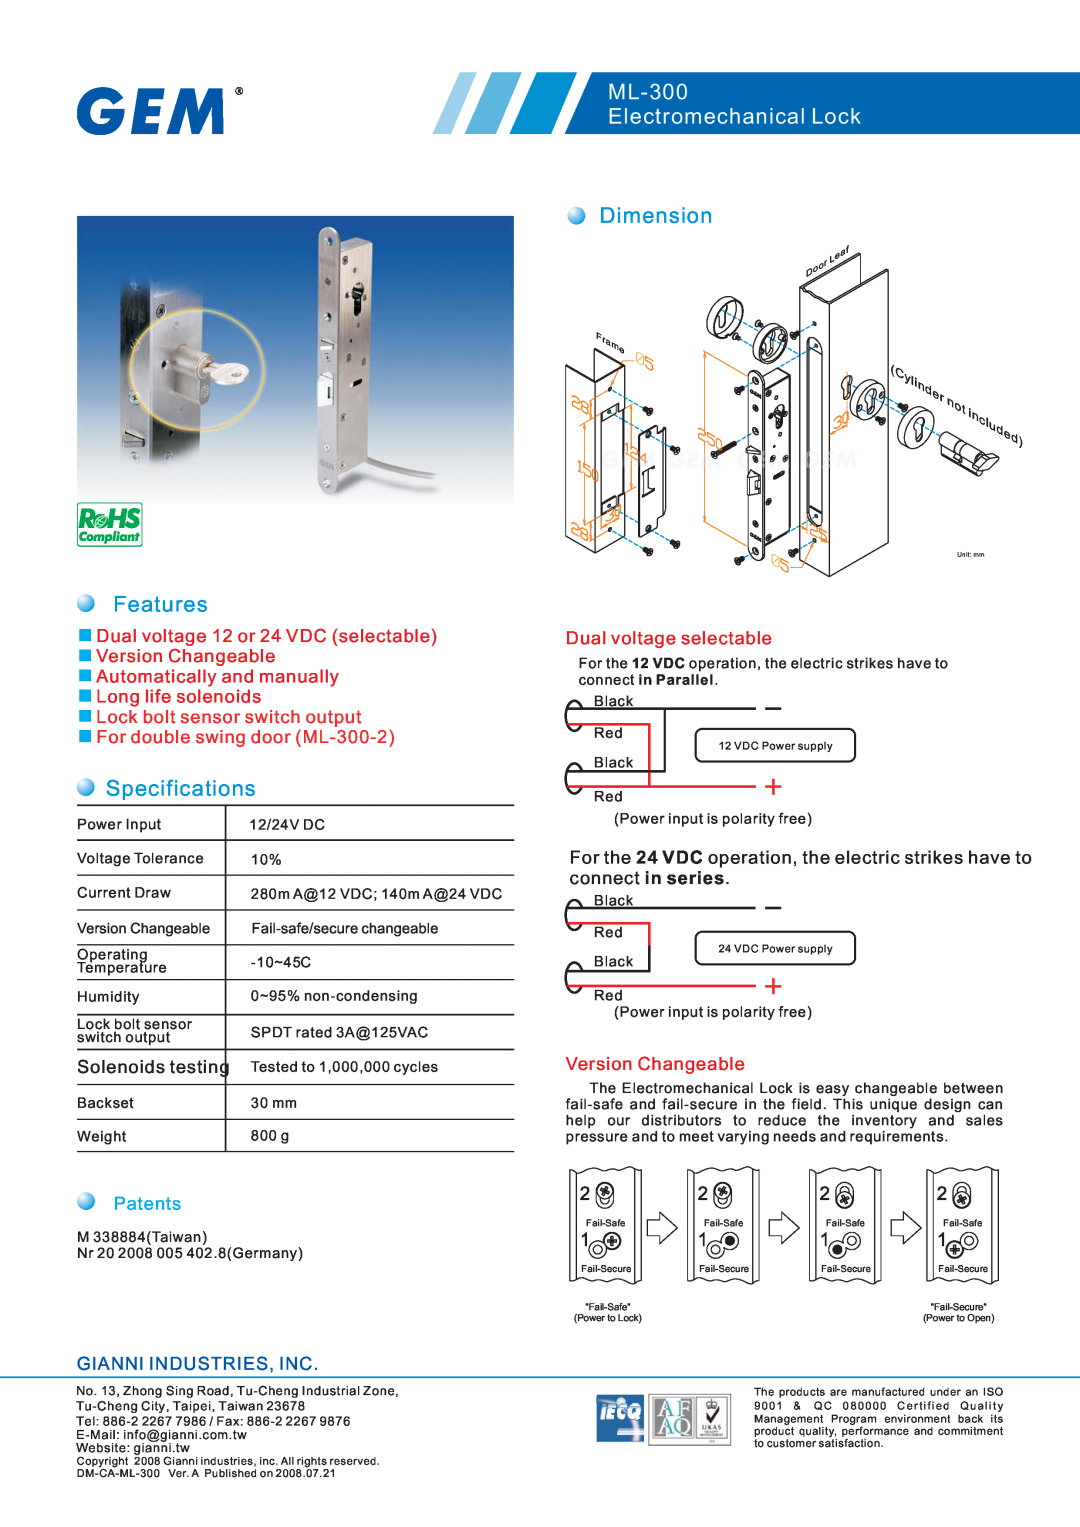 Gianni Industries specifications ML-300 Electromechanical Lock, Dimension, Features, Specifications, Solenoids testing 